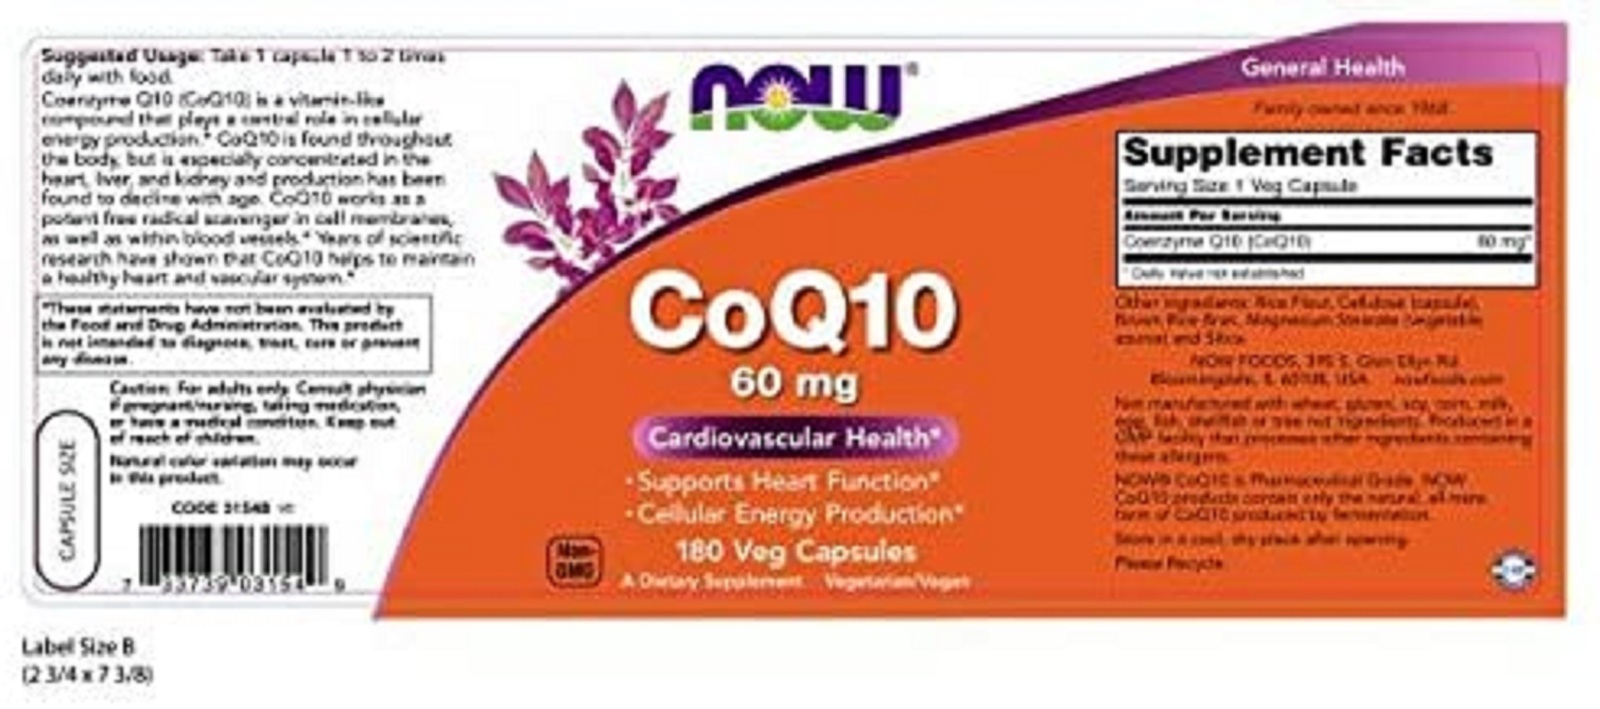 NOW Supplements, CoQ10 60 mg, Pharmaceutical Grade, All-Trans Form of CoQ10